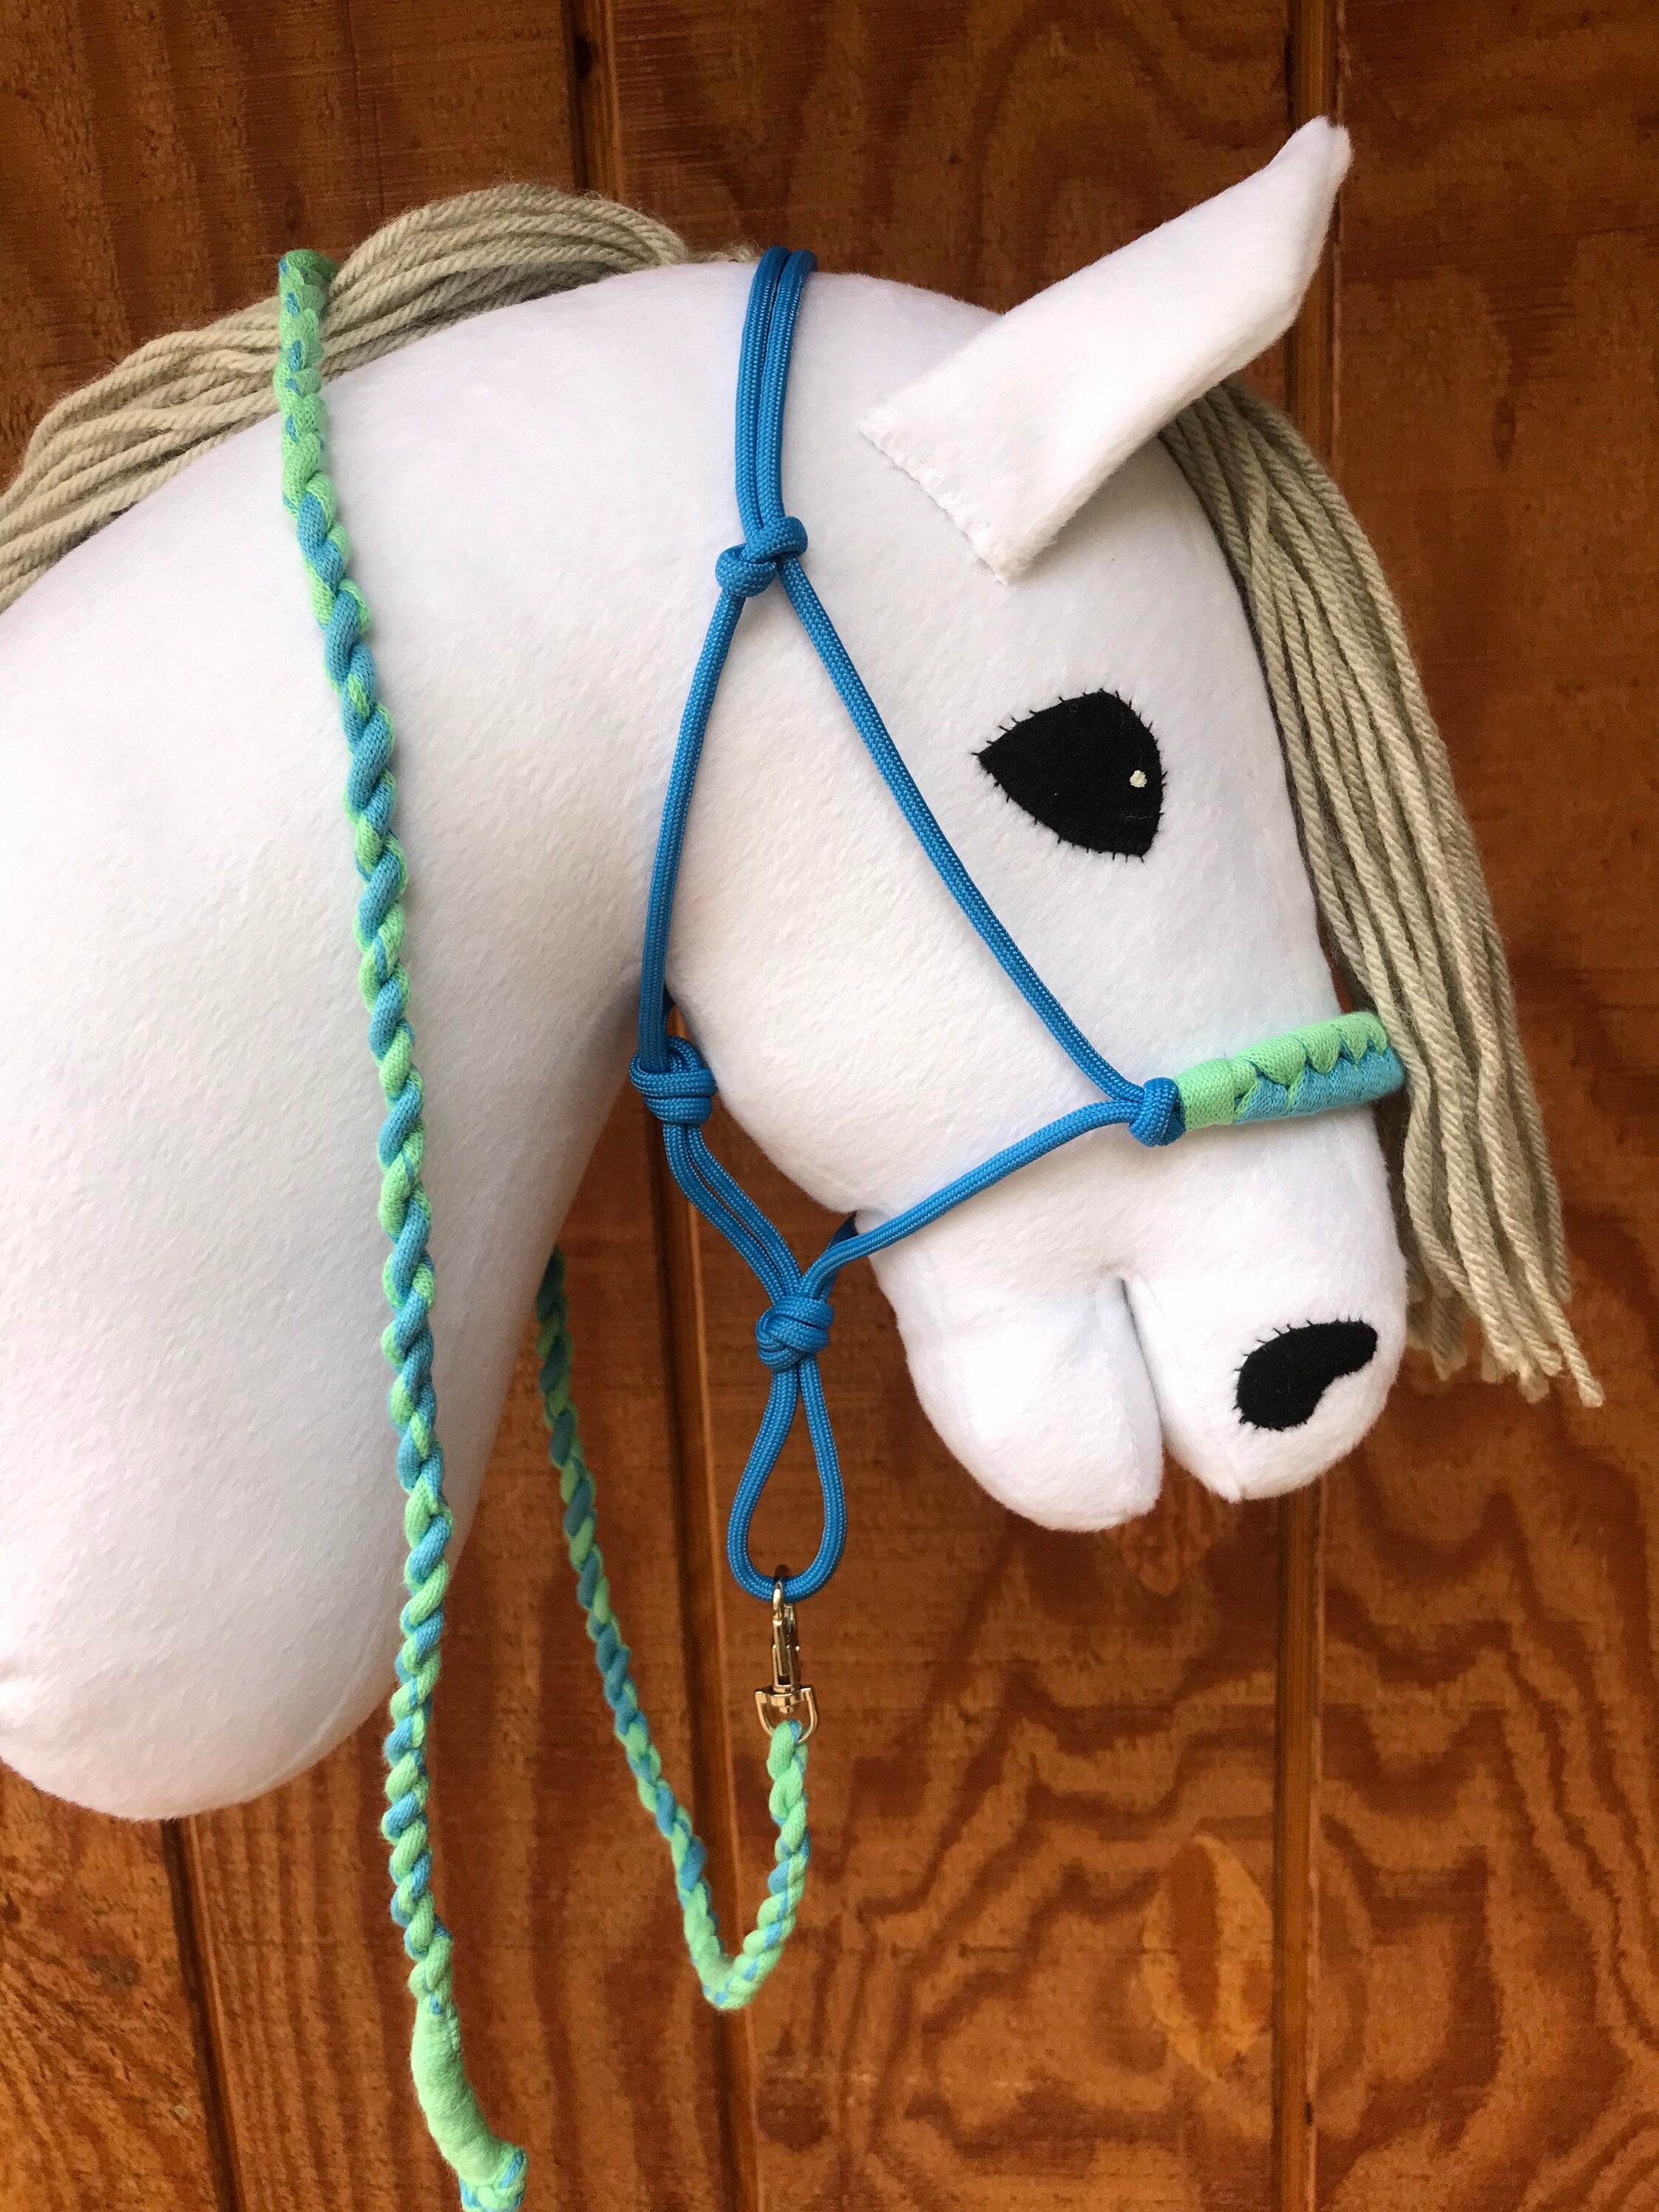 Hobby horse rope halter and lead rope set blue mint green